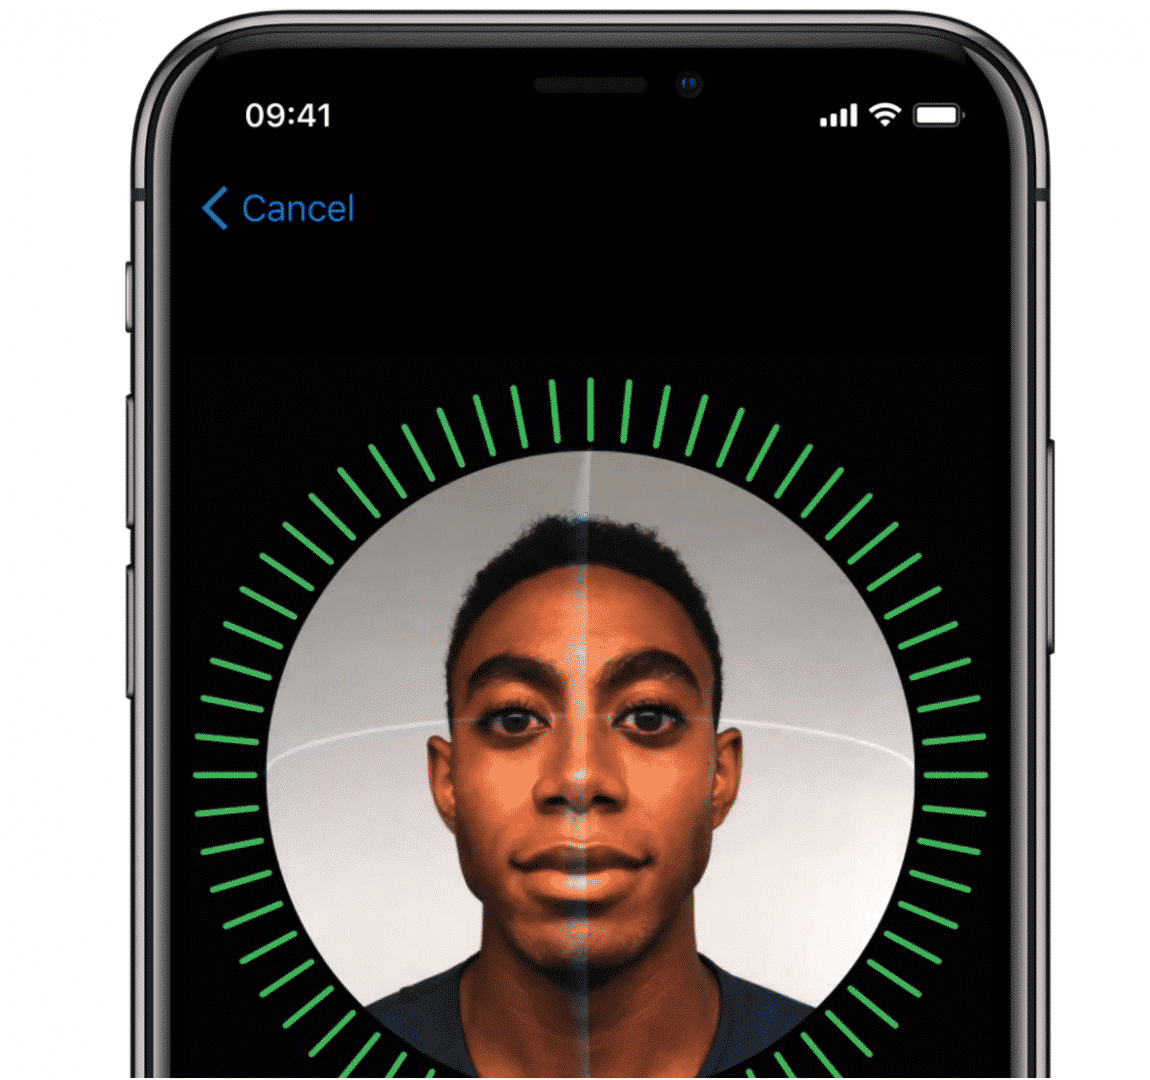 Face ID iPhone X